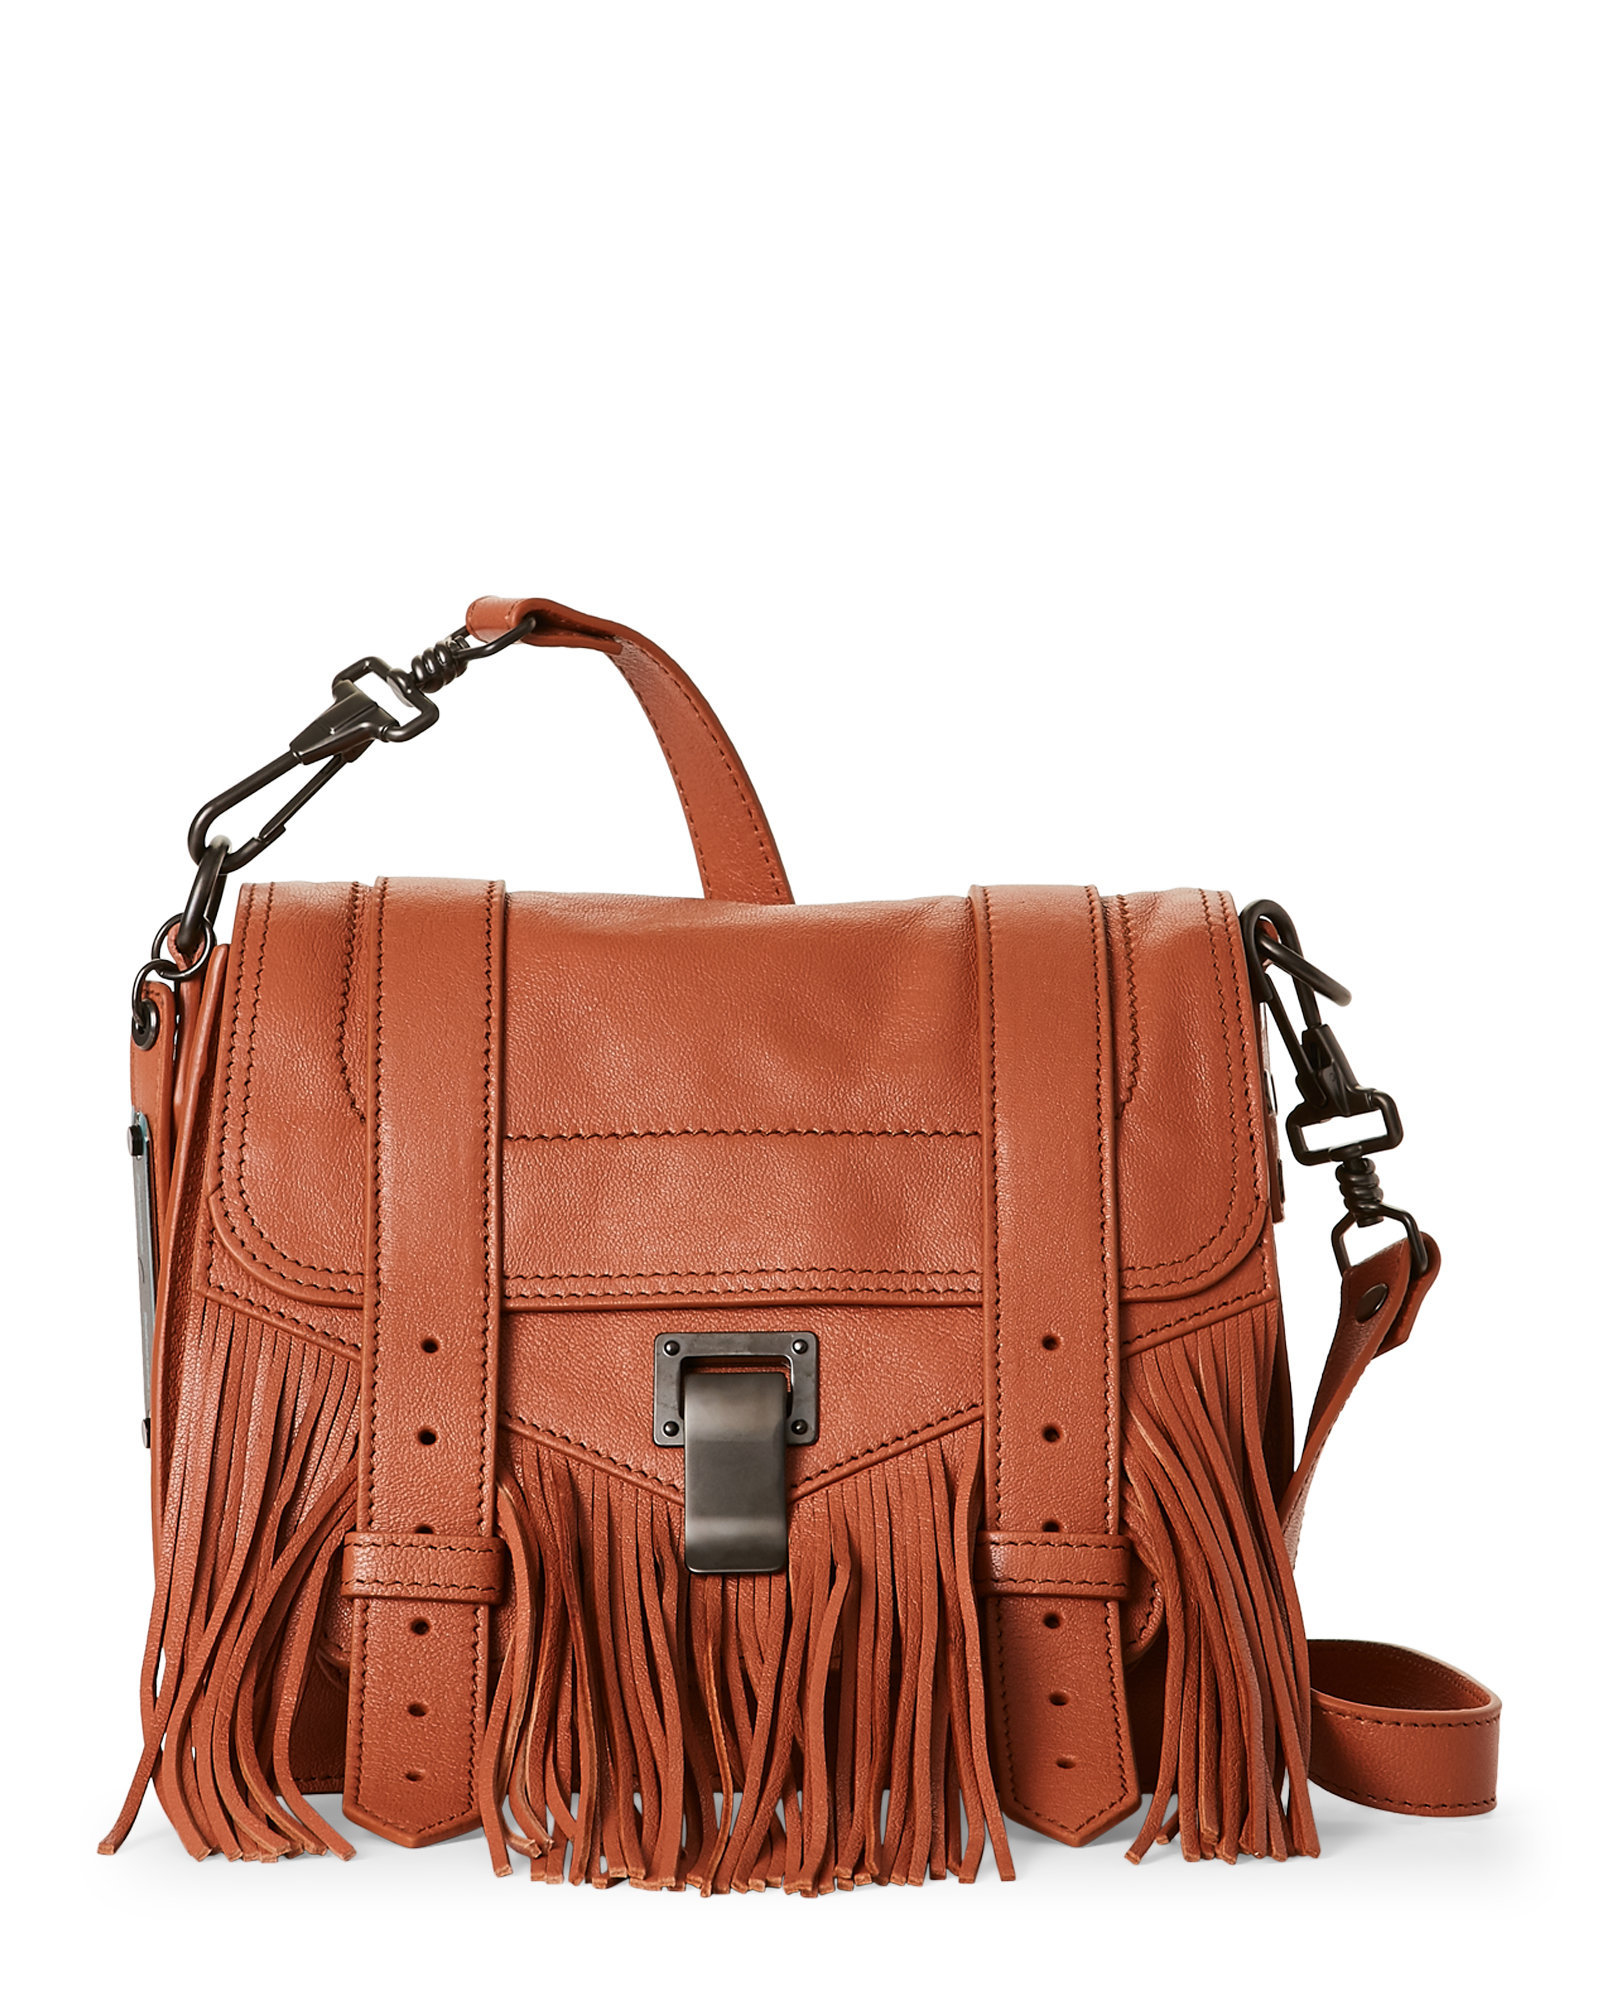 Proenza Schouler Leather Dune Ps1 Fringe Pouch Crossbody in Brown - Lyst